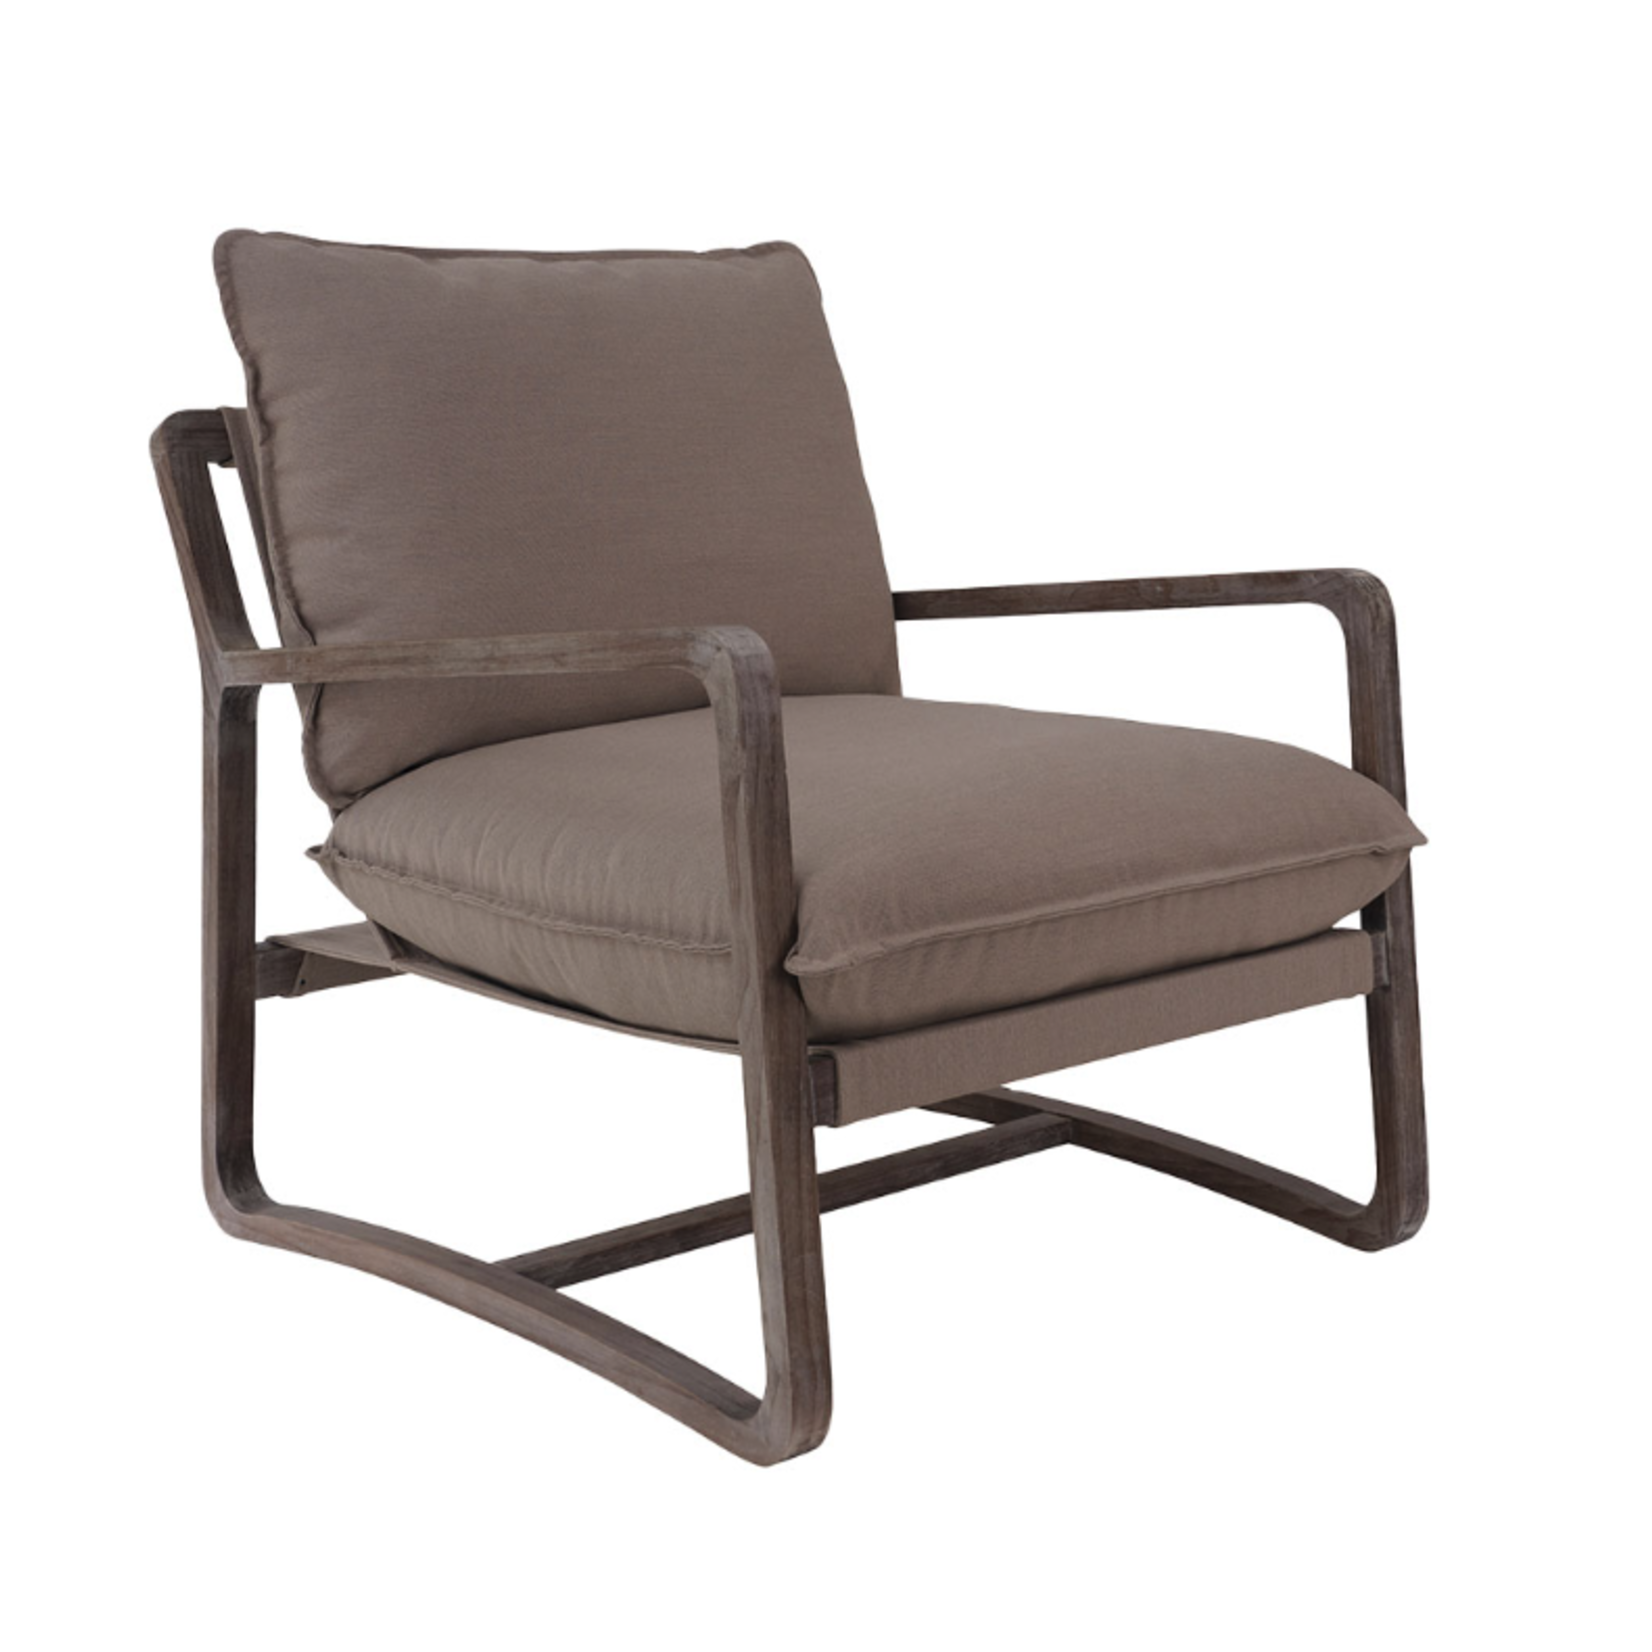 Outside The Box Sorrento Tan Indoor / Outdoor Chair